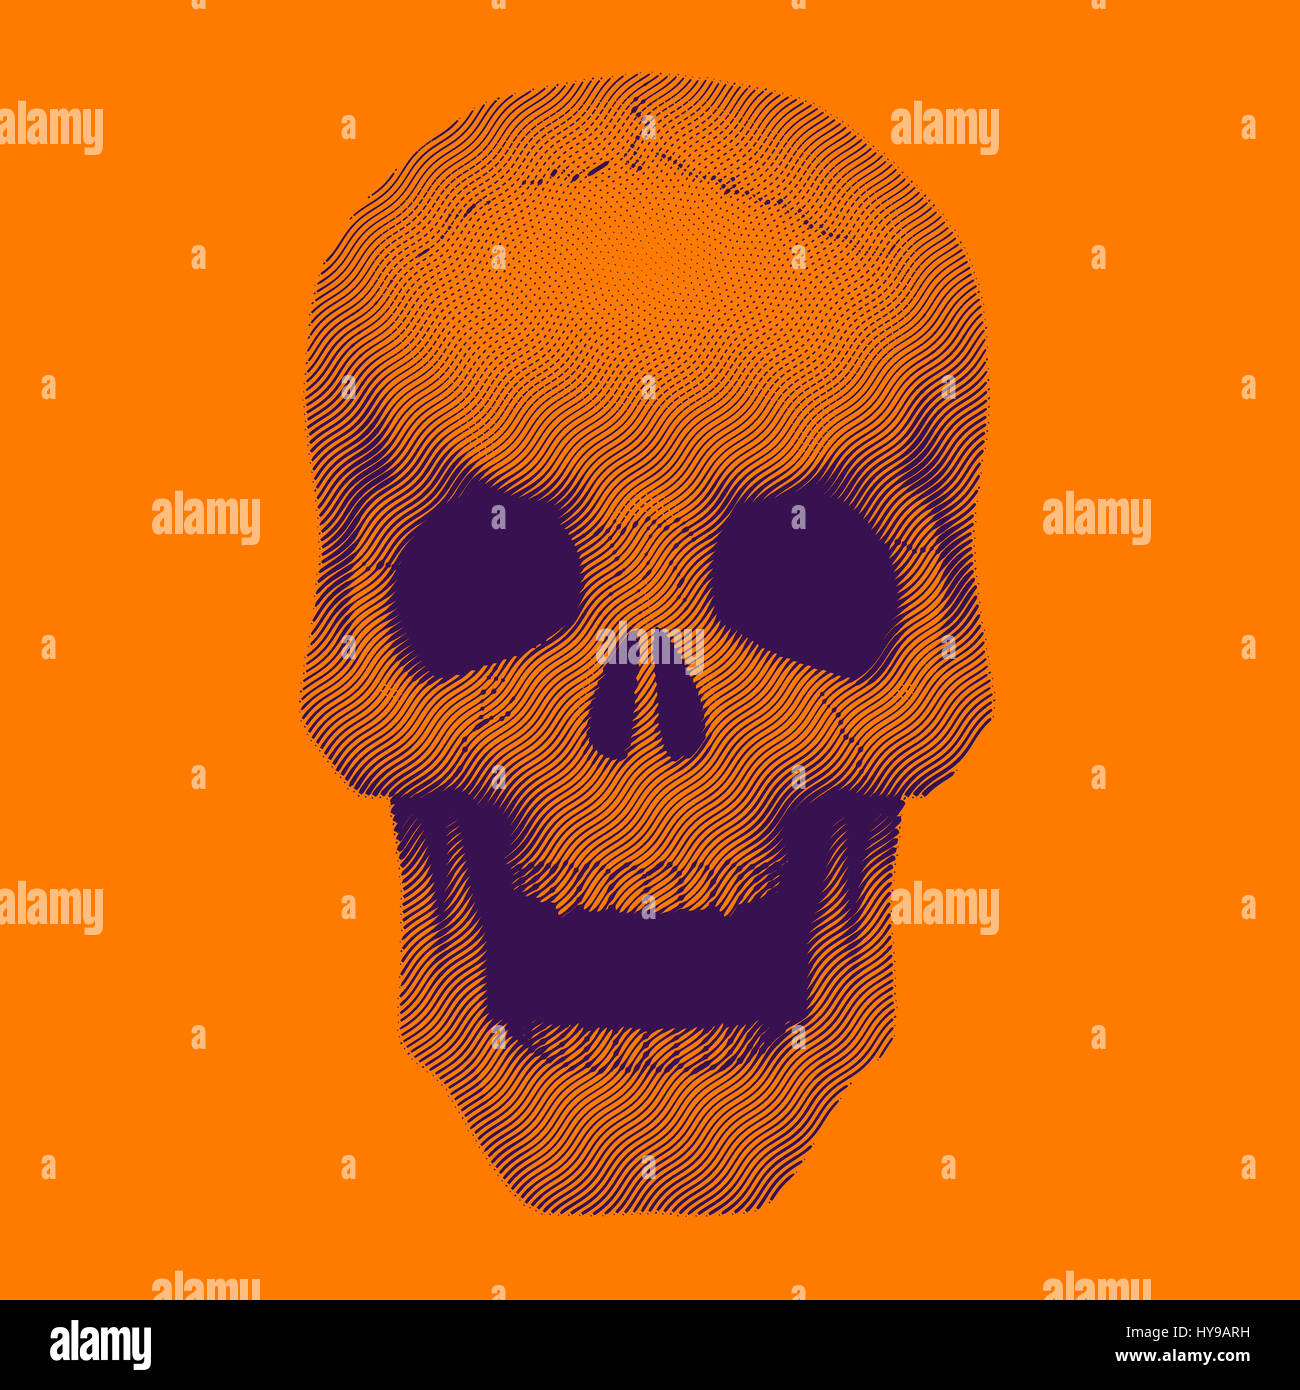 Skull in vintage duotone and halftone style. Stock Photo